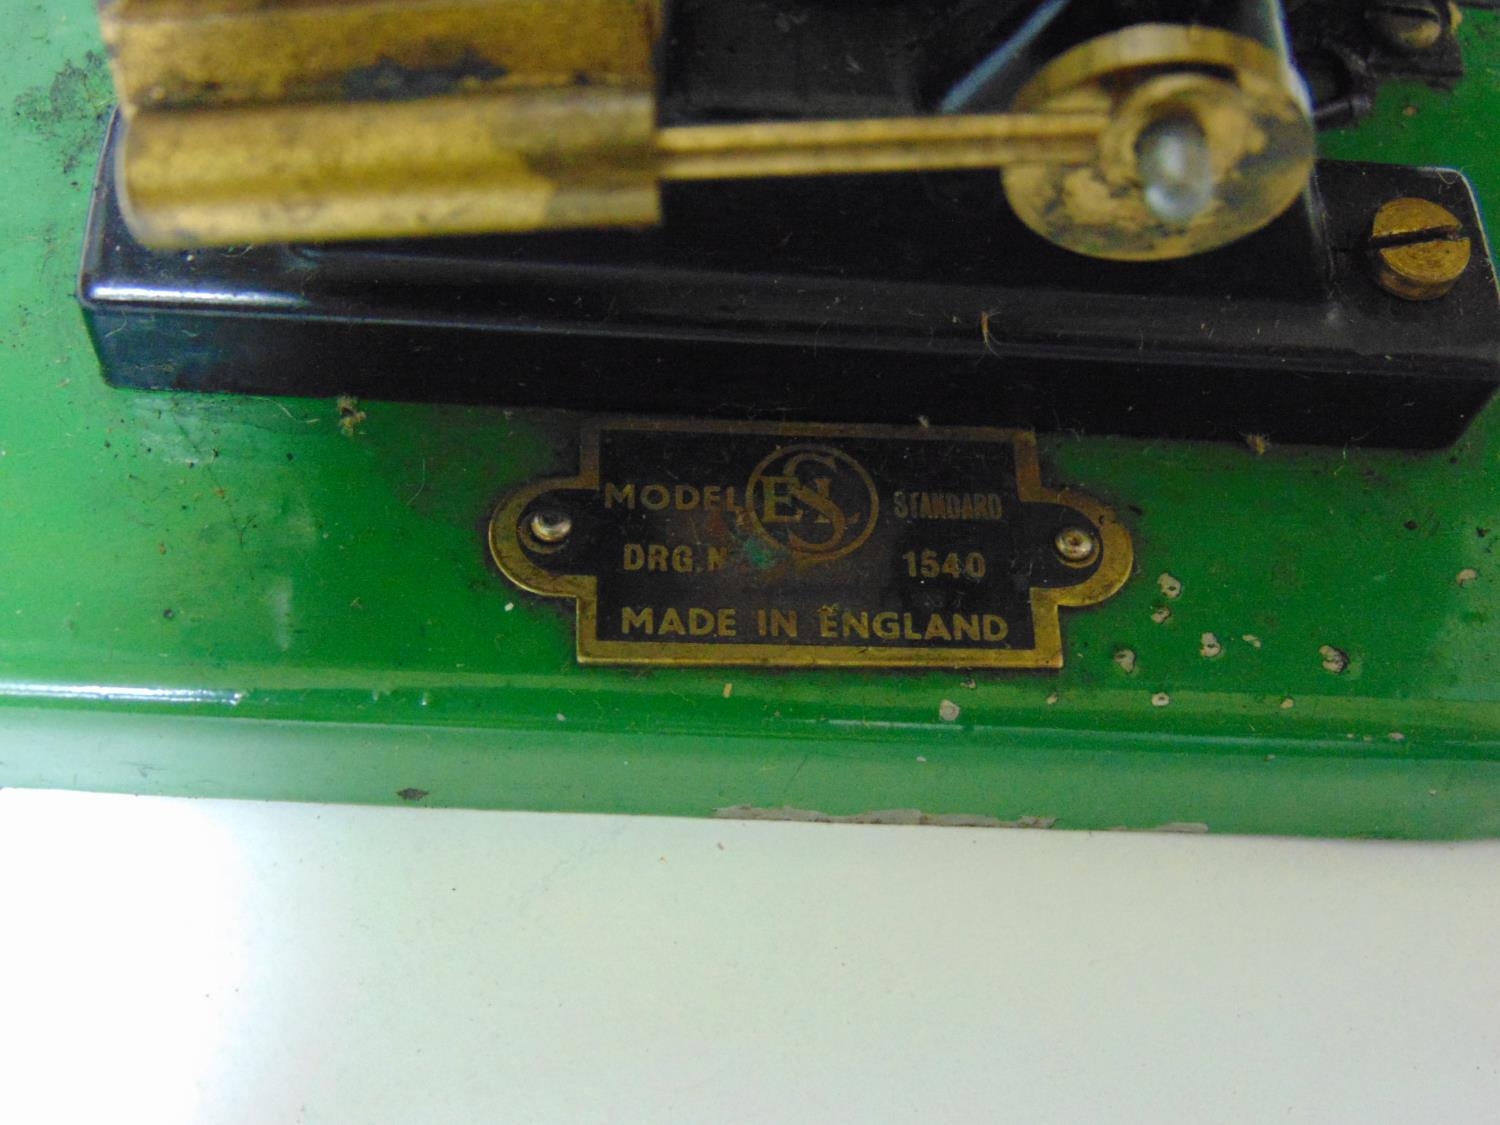 'Standard' steam engine No 1540 live steam model by SEL (Signalling Equipment Ltd) C1946-1965 with - Image 4 of 4